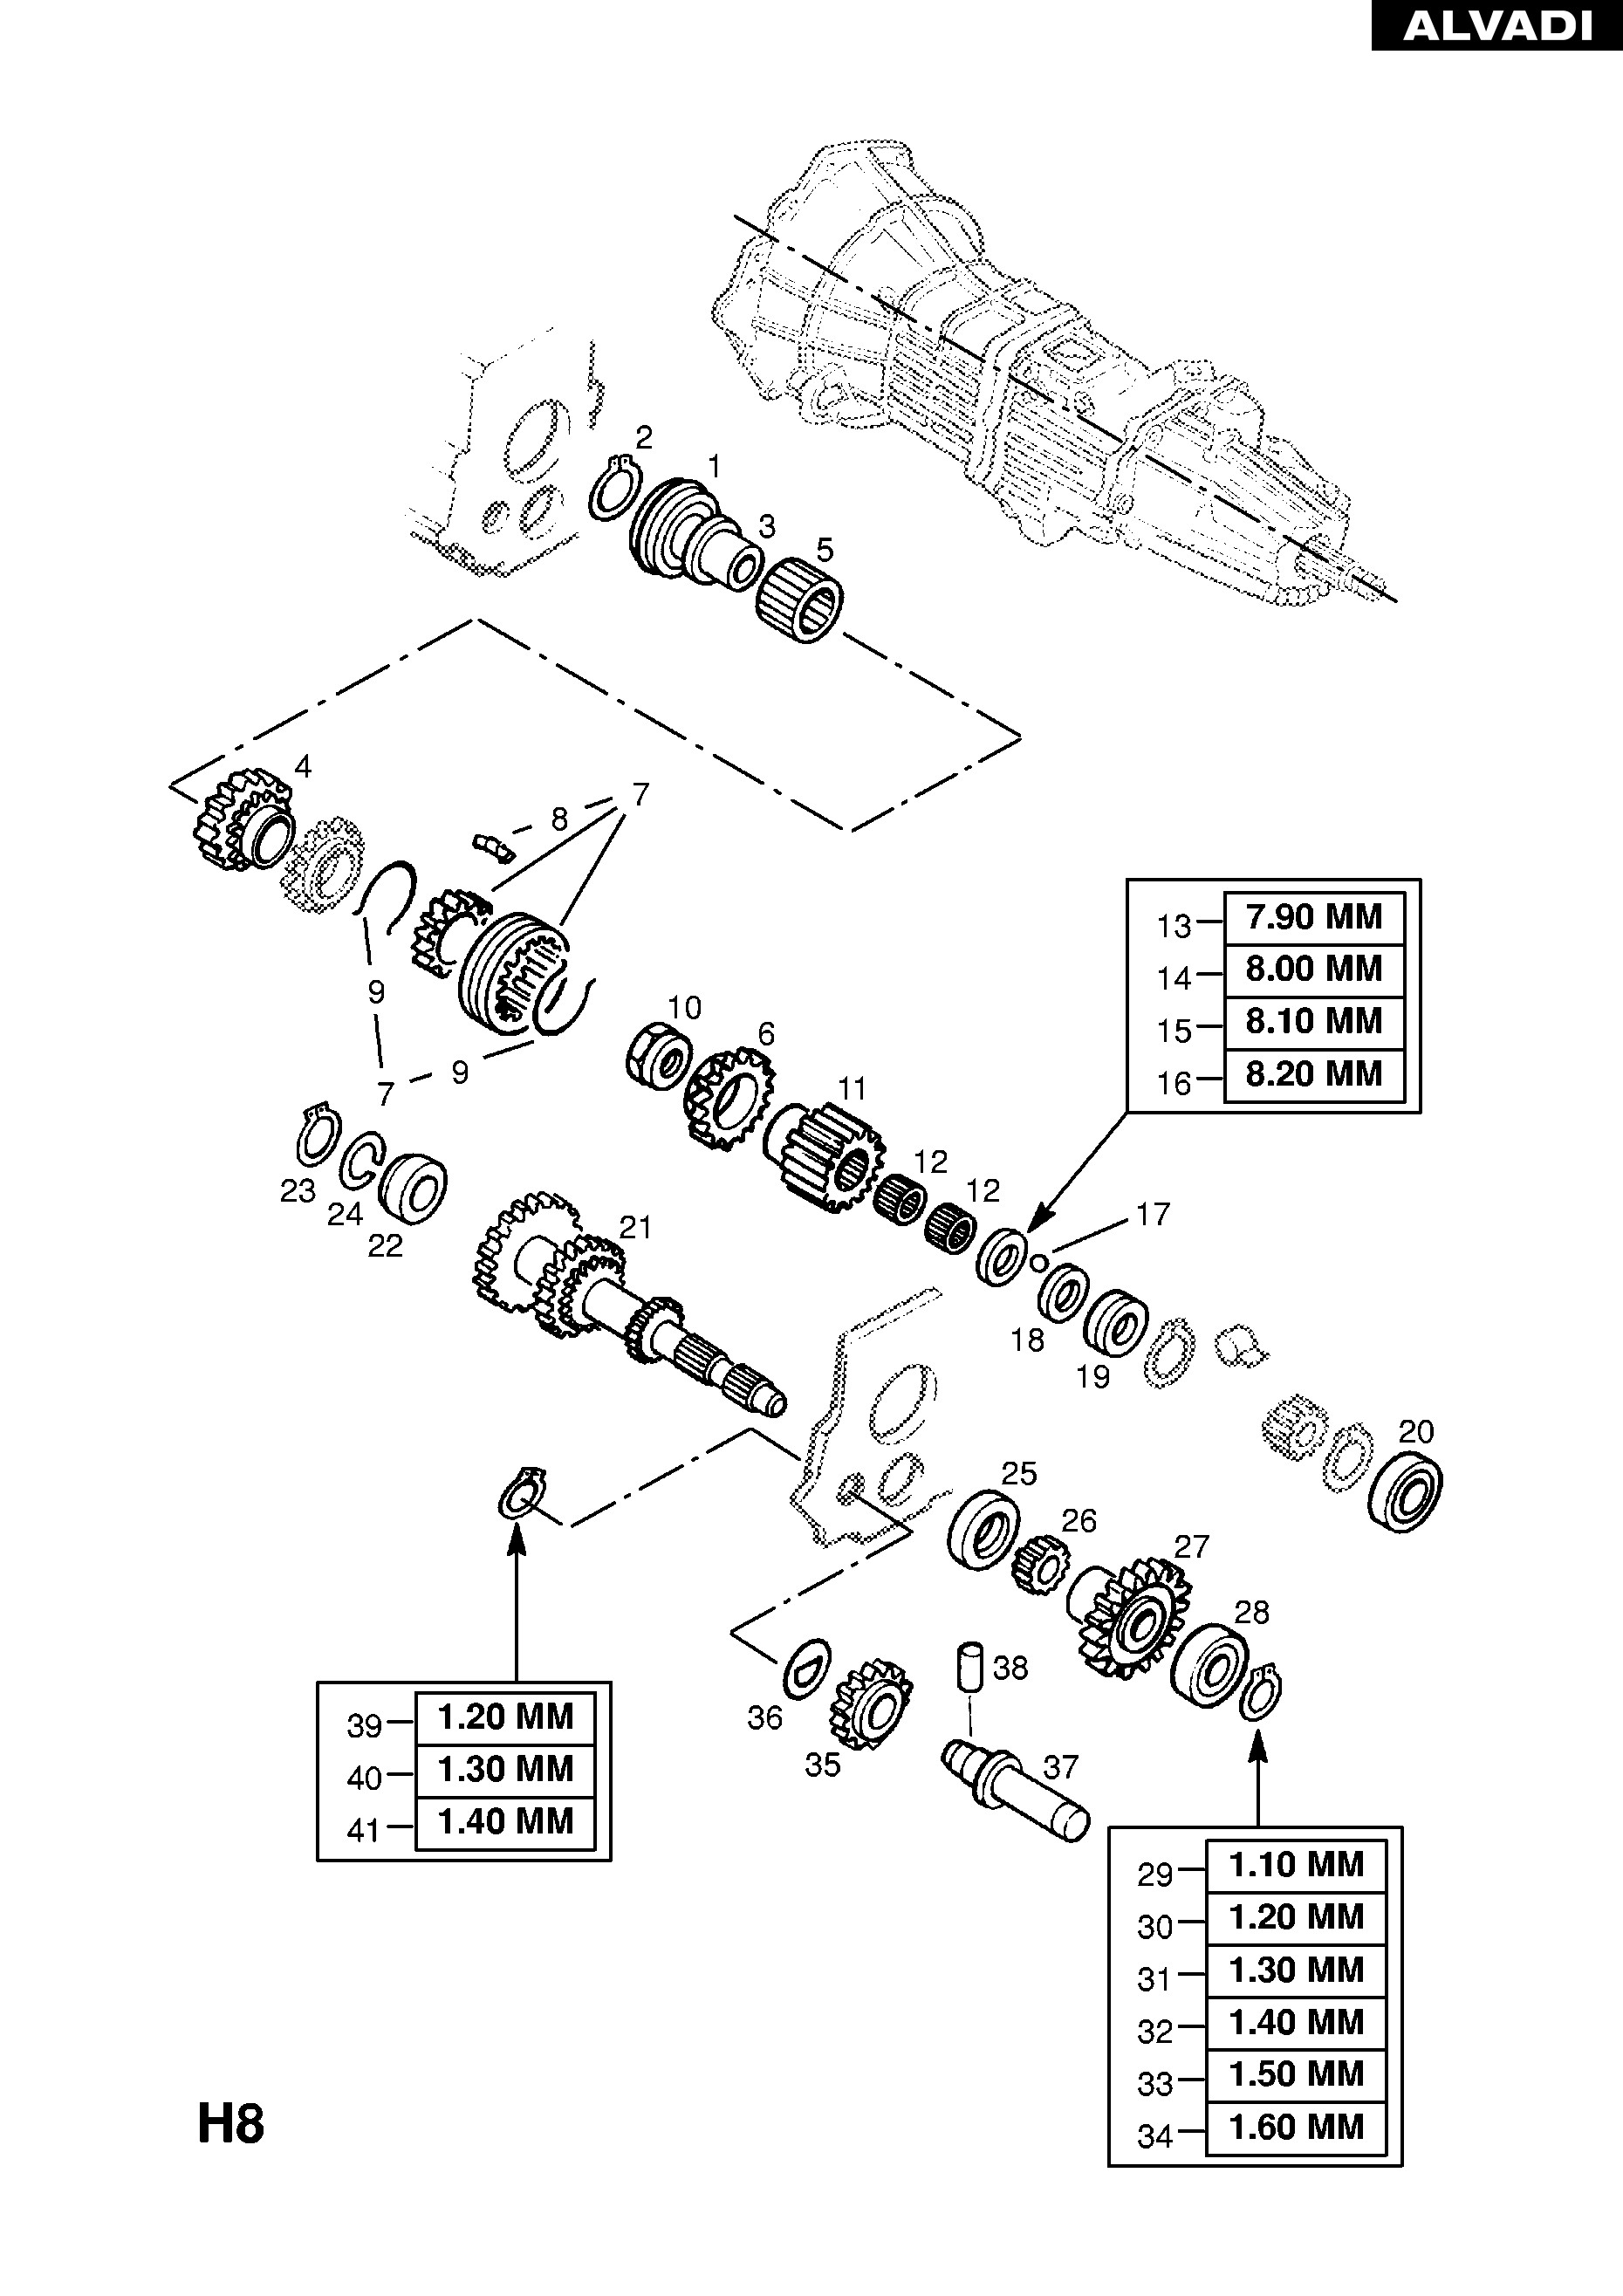 Automatic Transmission Parts Diagram Opel Manual Transmission Countershaft and Gears Of Automatic Transmission Parts Diagram